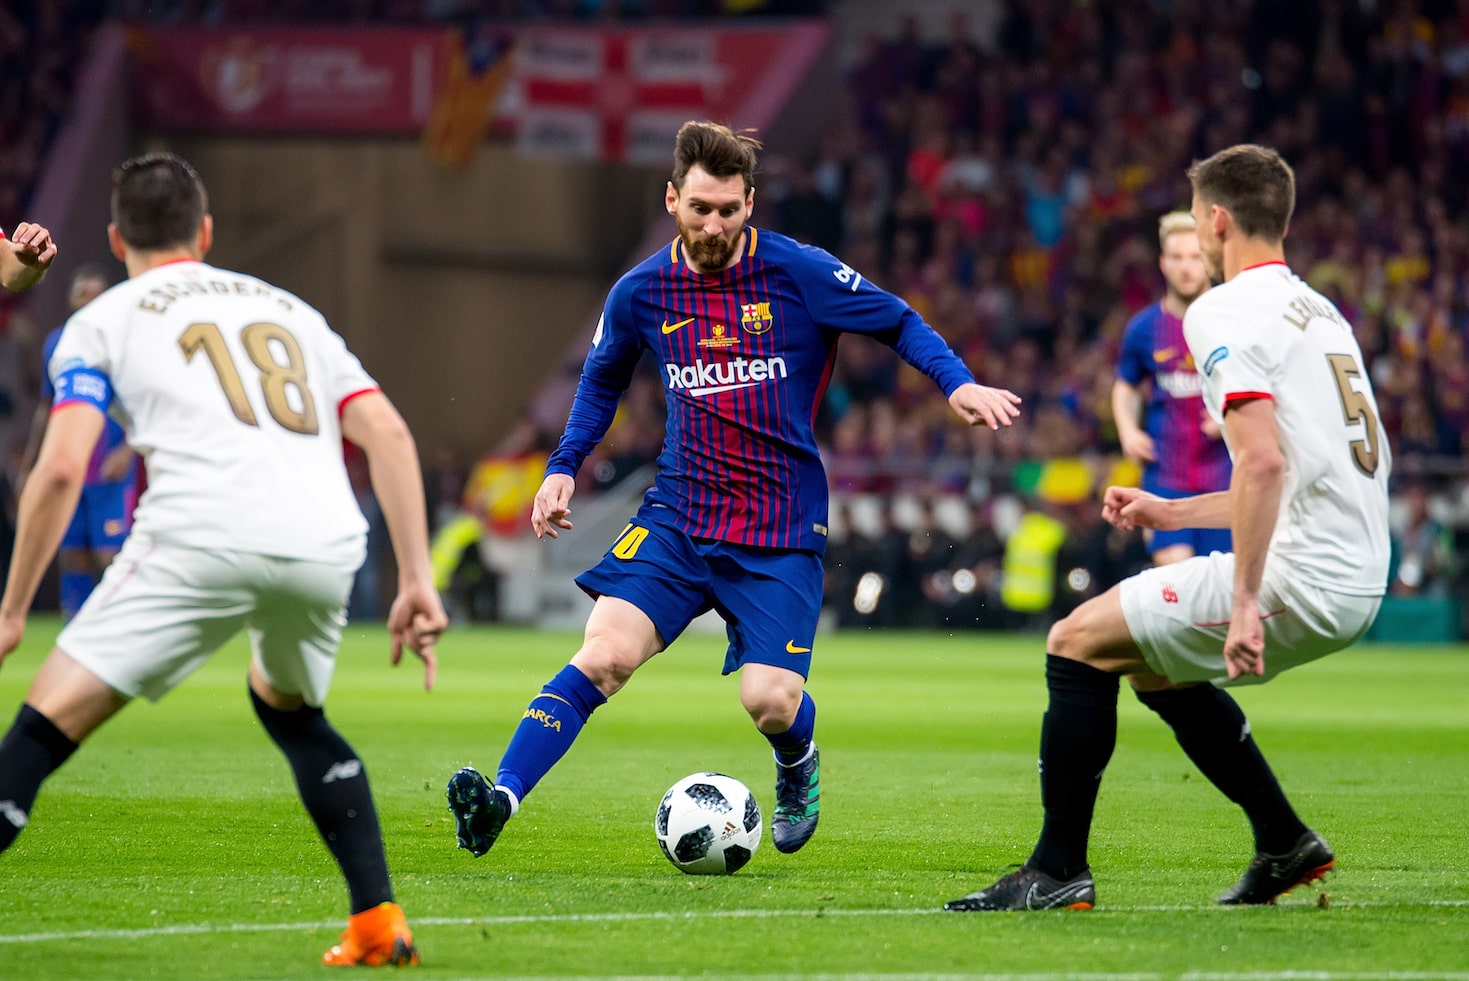 Messi showing agility in soccer